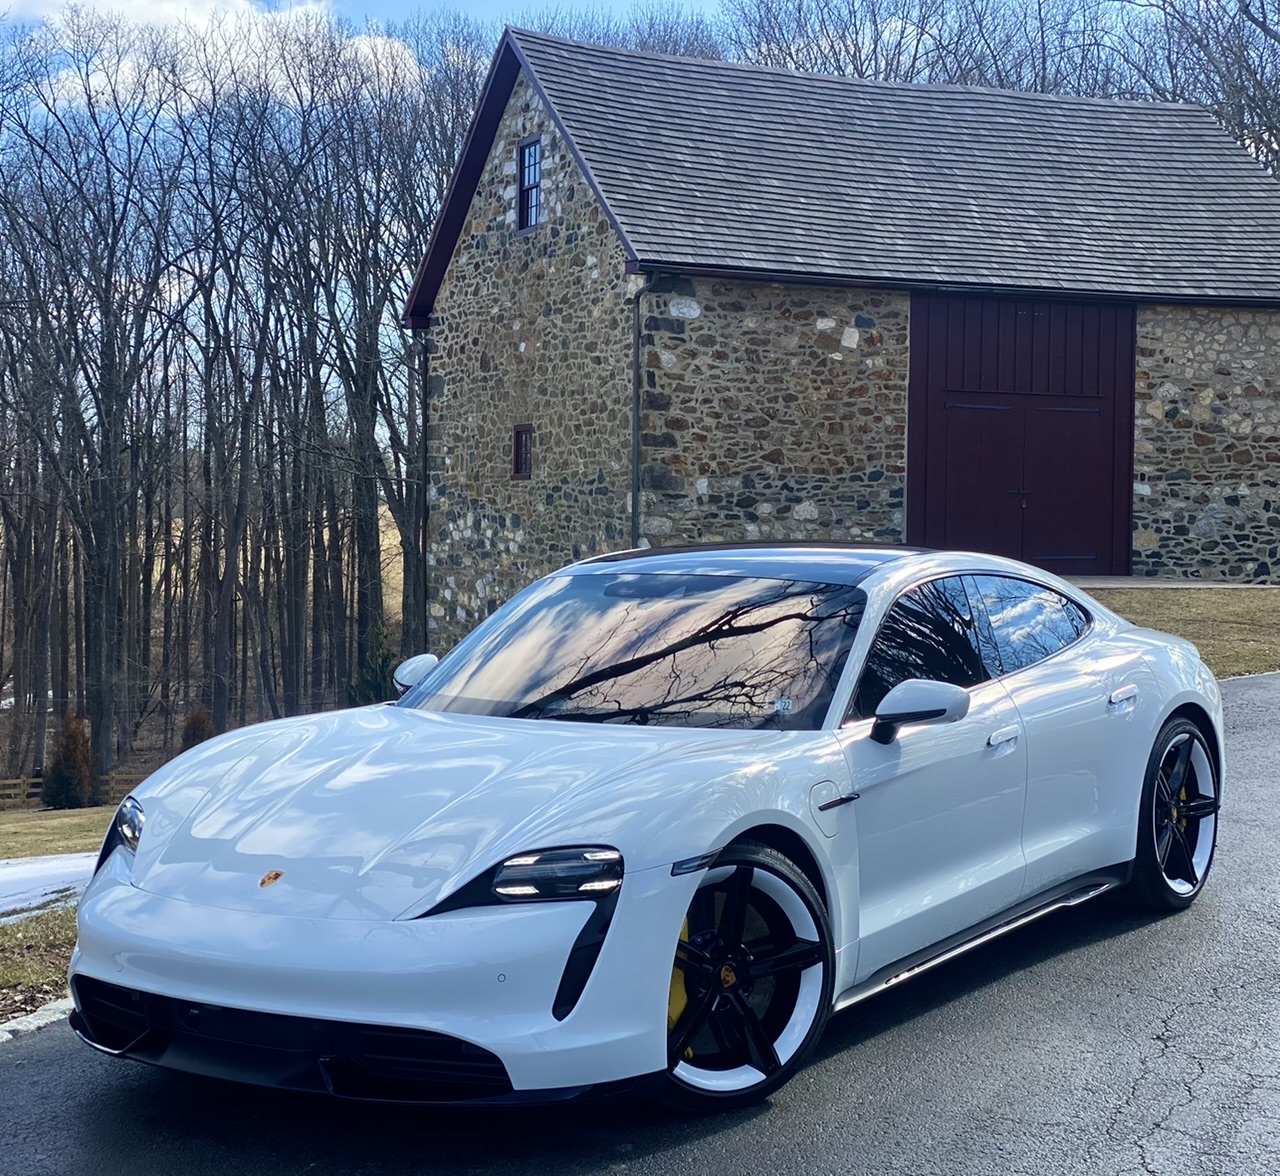 Porsche Taycan Powder Coating Mission E Wheels on White TS - Opinions Needed! 47A31343-5CAB-4150-90E0-3837FBA1673D